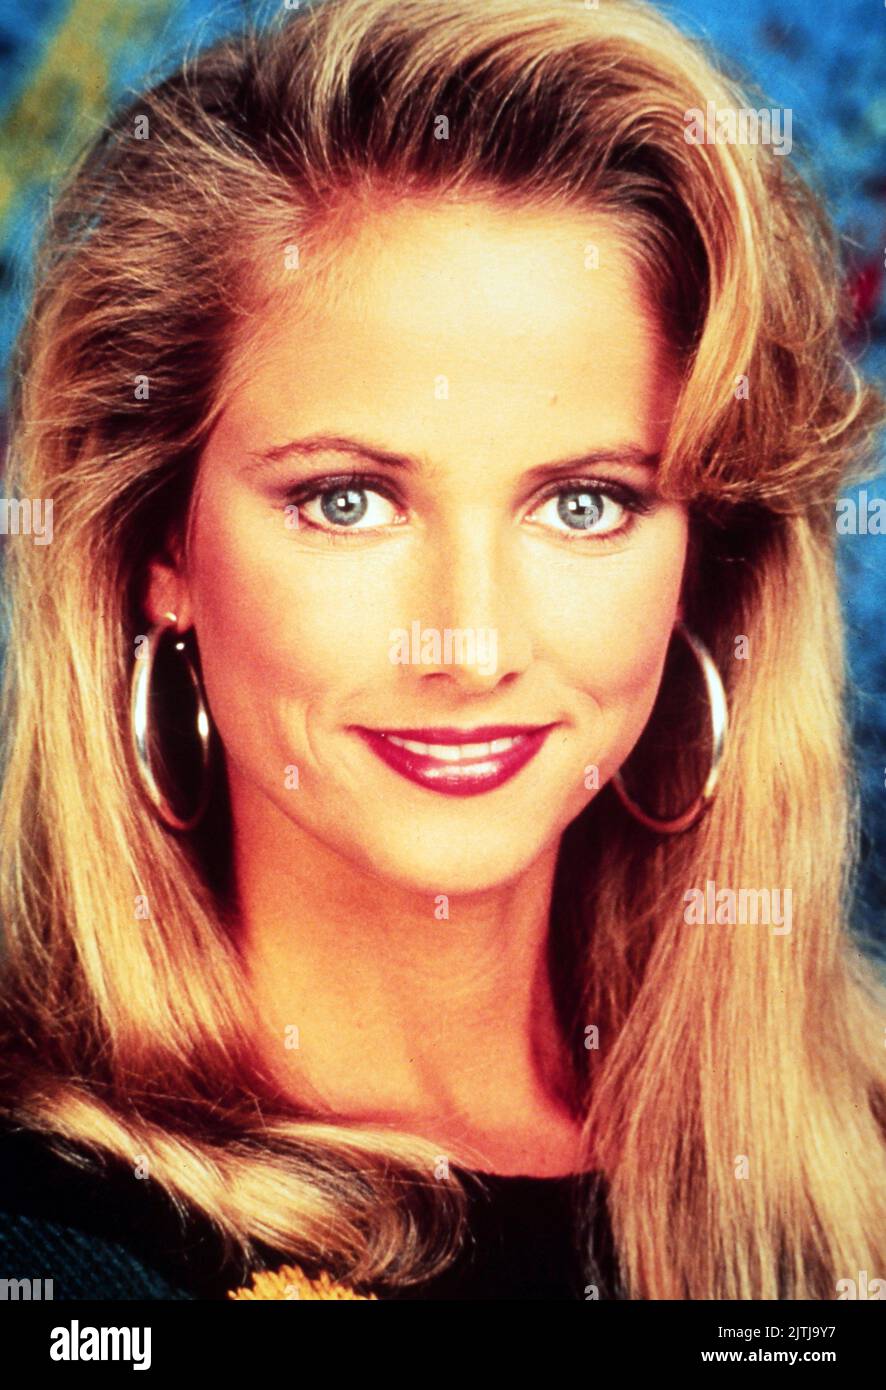 Dallas, Fernsehserie, USA 1978 - 1991, Darsteller: Cathy Podewell Stock Photo